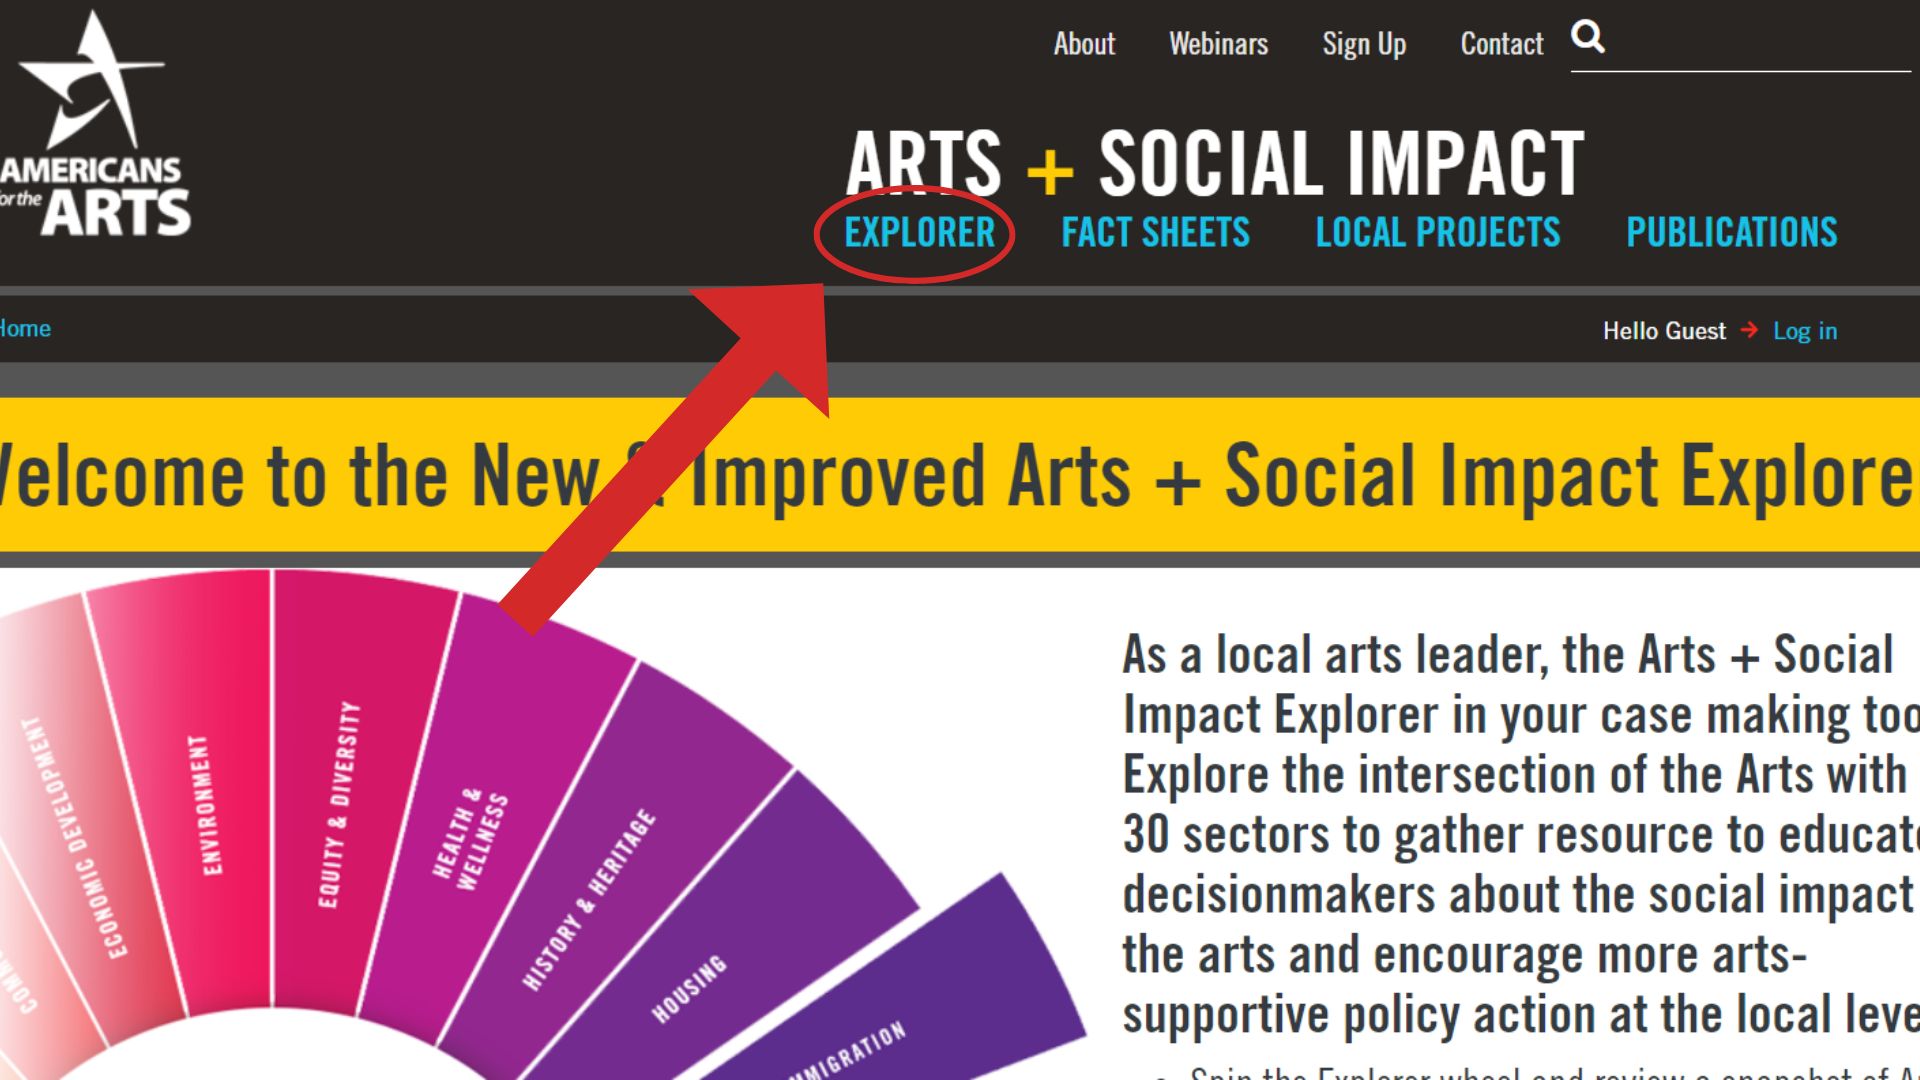 A webpage with a black heading, yellow banner and white background. The webpage features text about the Arts and Impact Explorer as well as a cropped image of the wheel. The wheel features different shades of red and purple with text on the slices of the wheel. There is a red arrow pointing to a red circle in the middle of the page. Within the red circle is a word in blue that reads 'Explorer'.